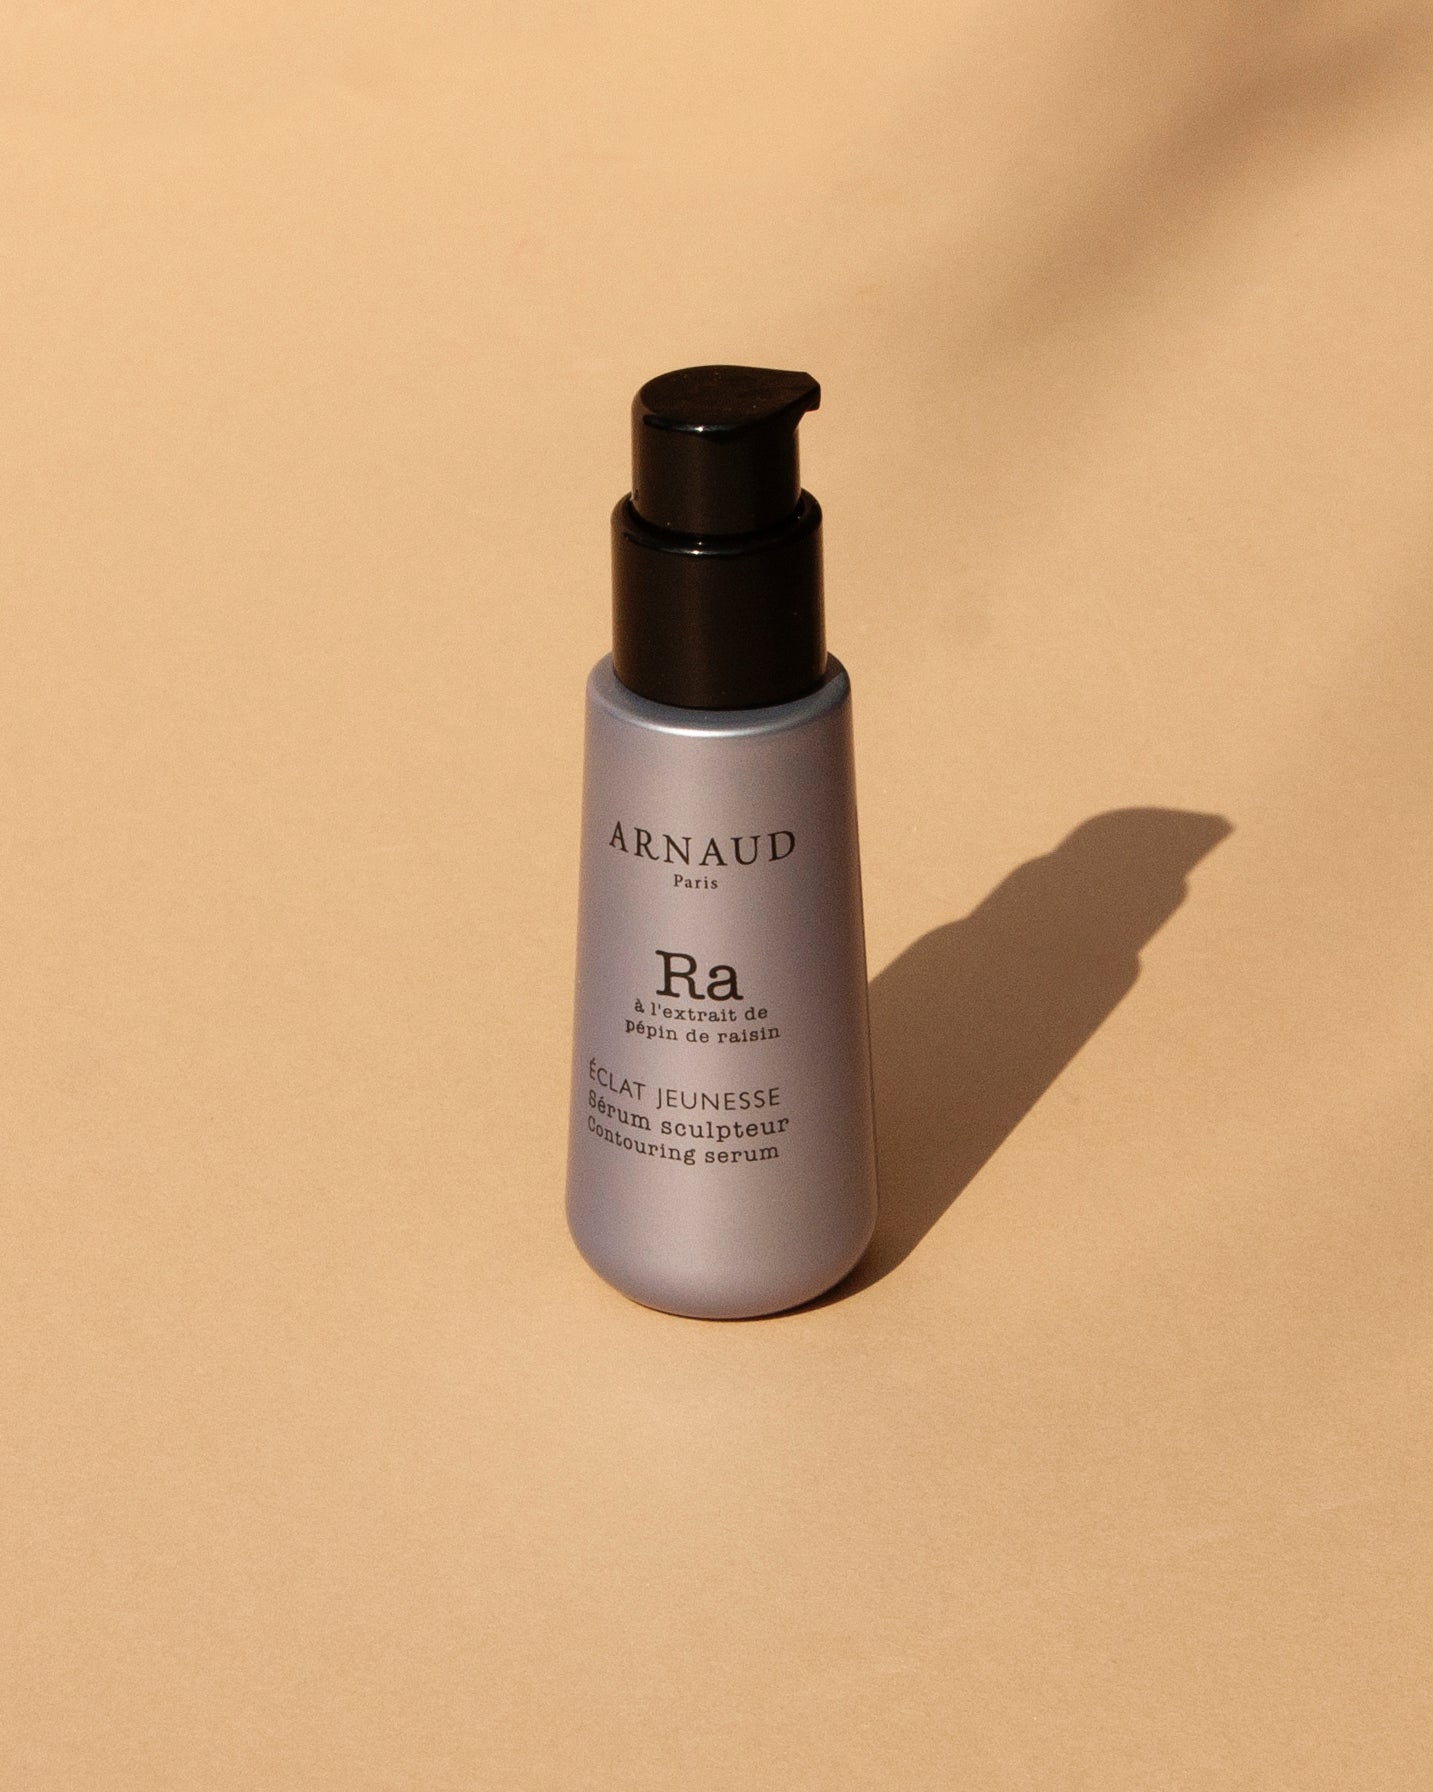 Ra with Grape Seed Extract Contouring Serum